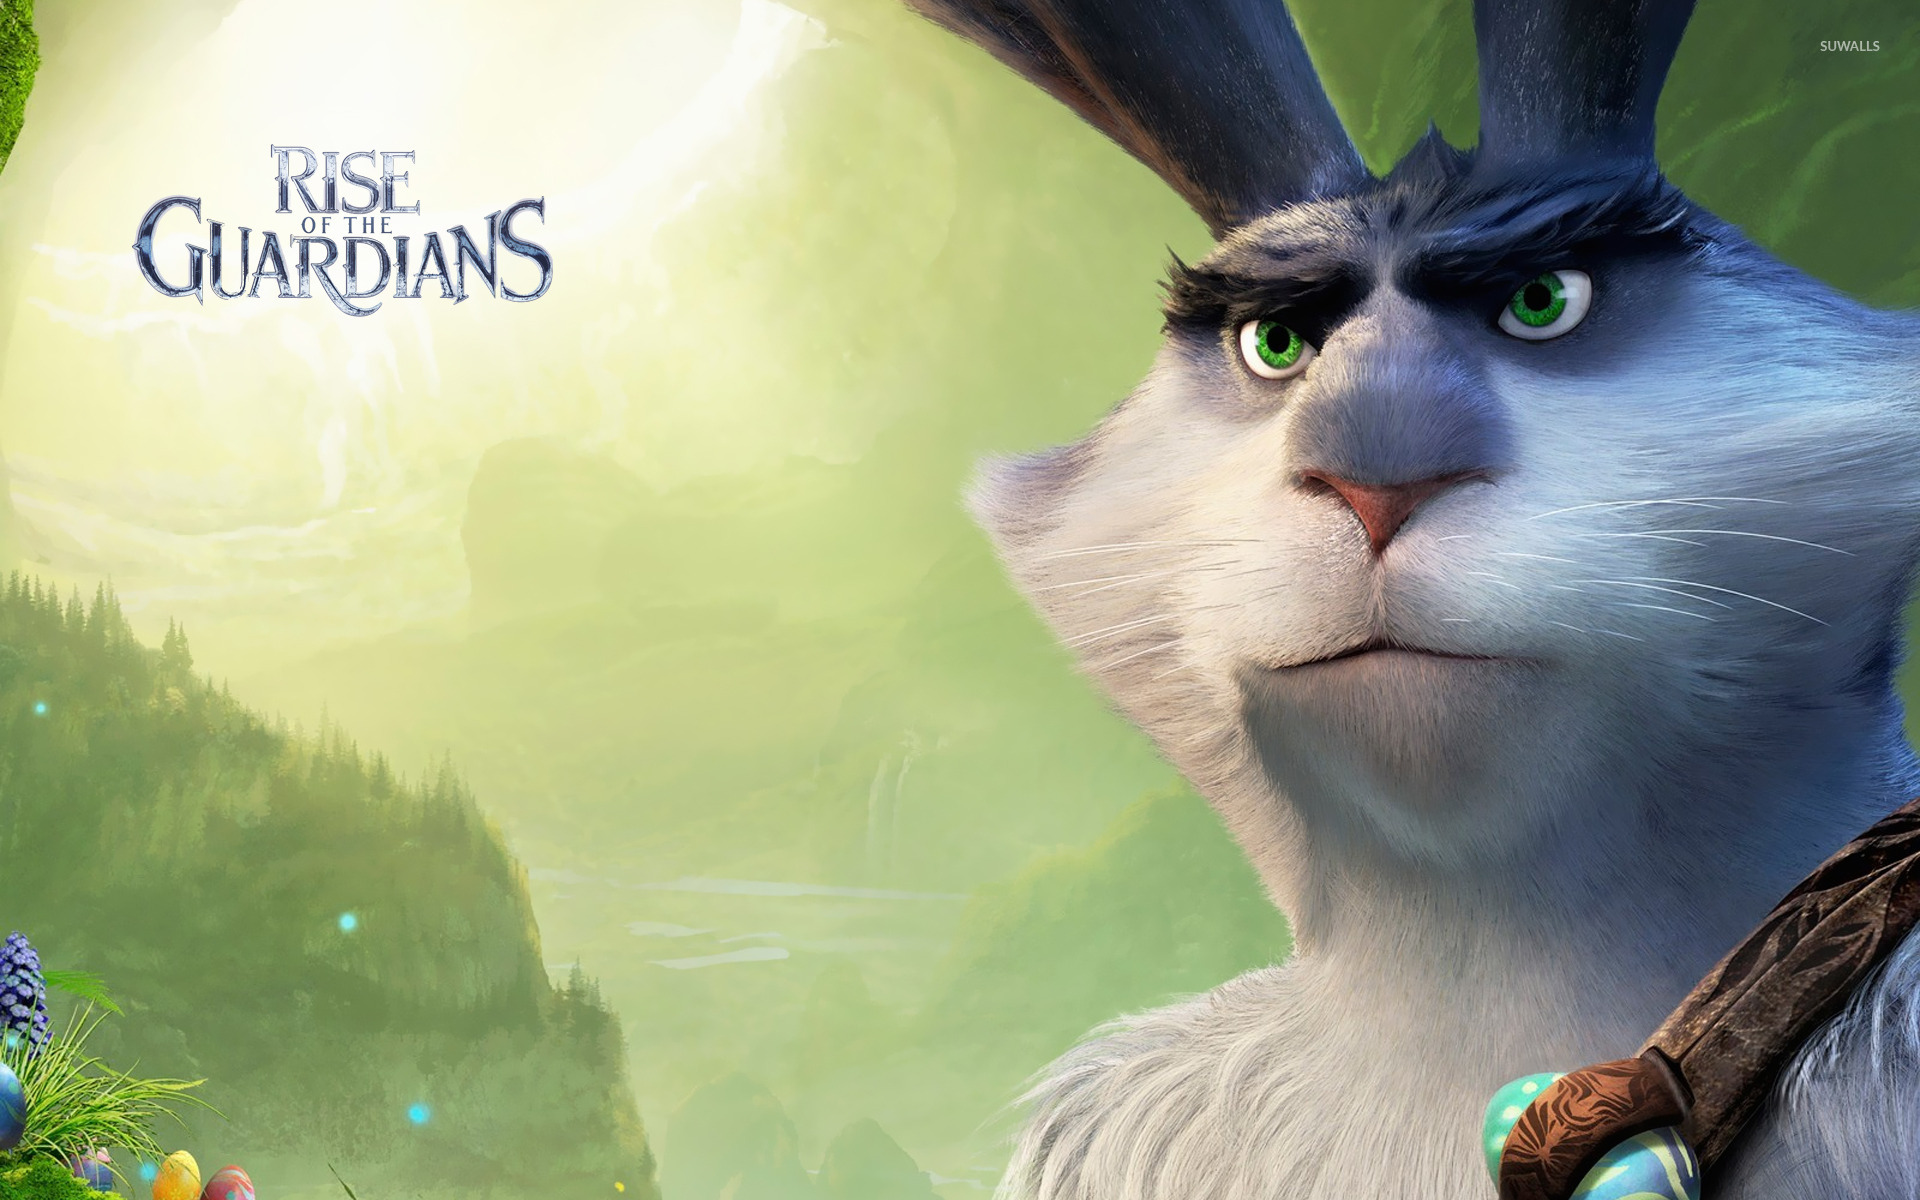 Easter Bunny - Rise of the Guardians wallpaper - Cartoon wallpapers